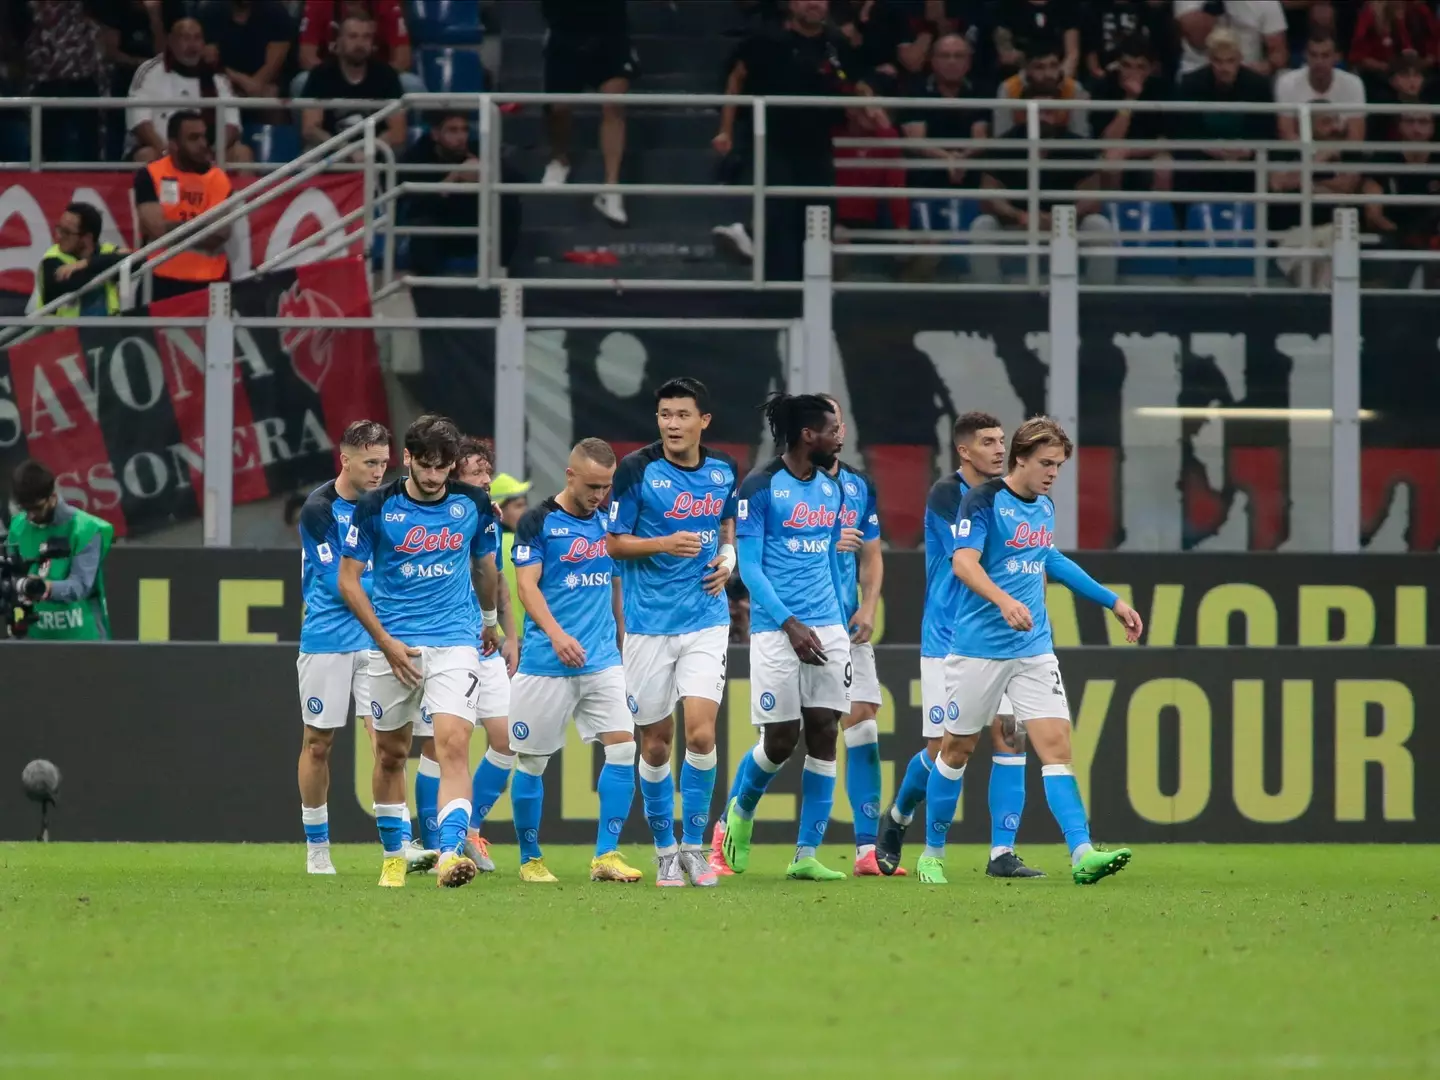 Napoli players celebrate during a Serie A match against AC Milan (